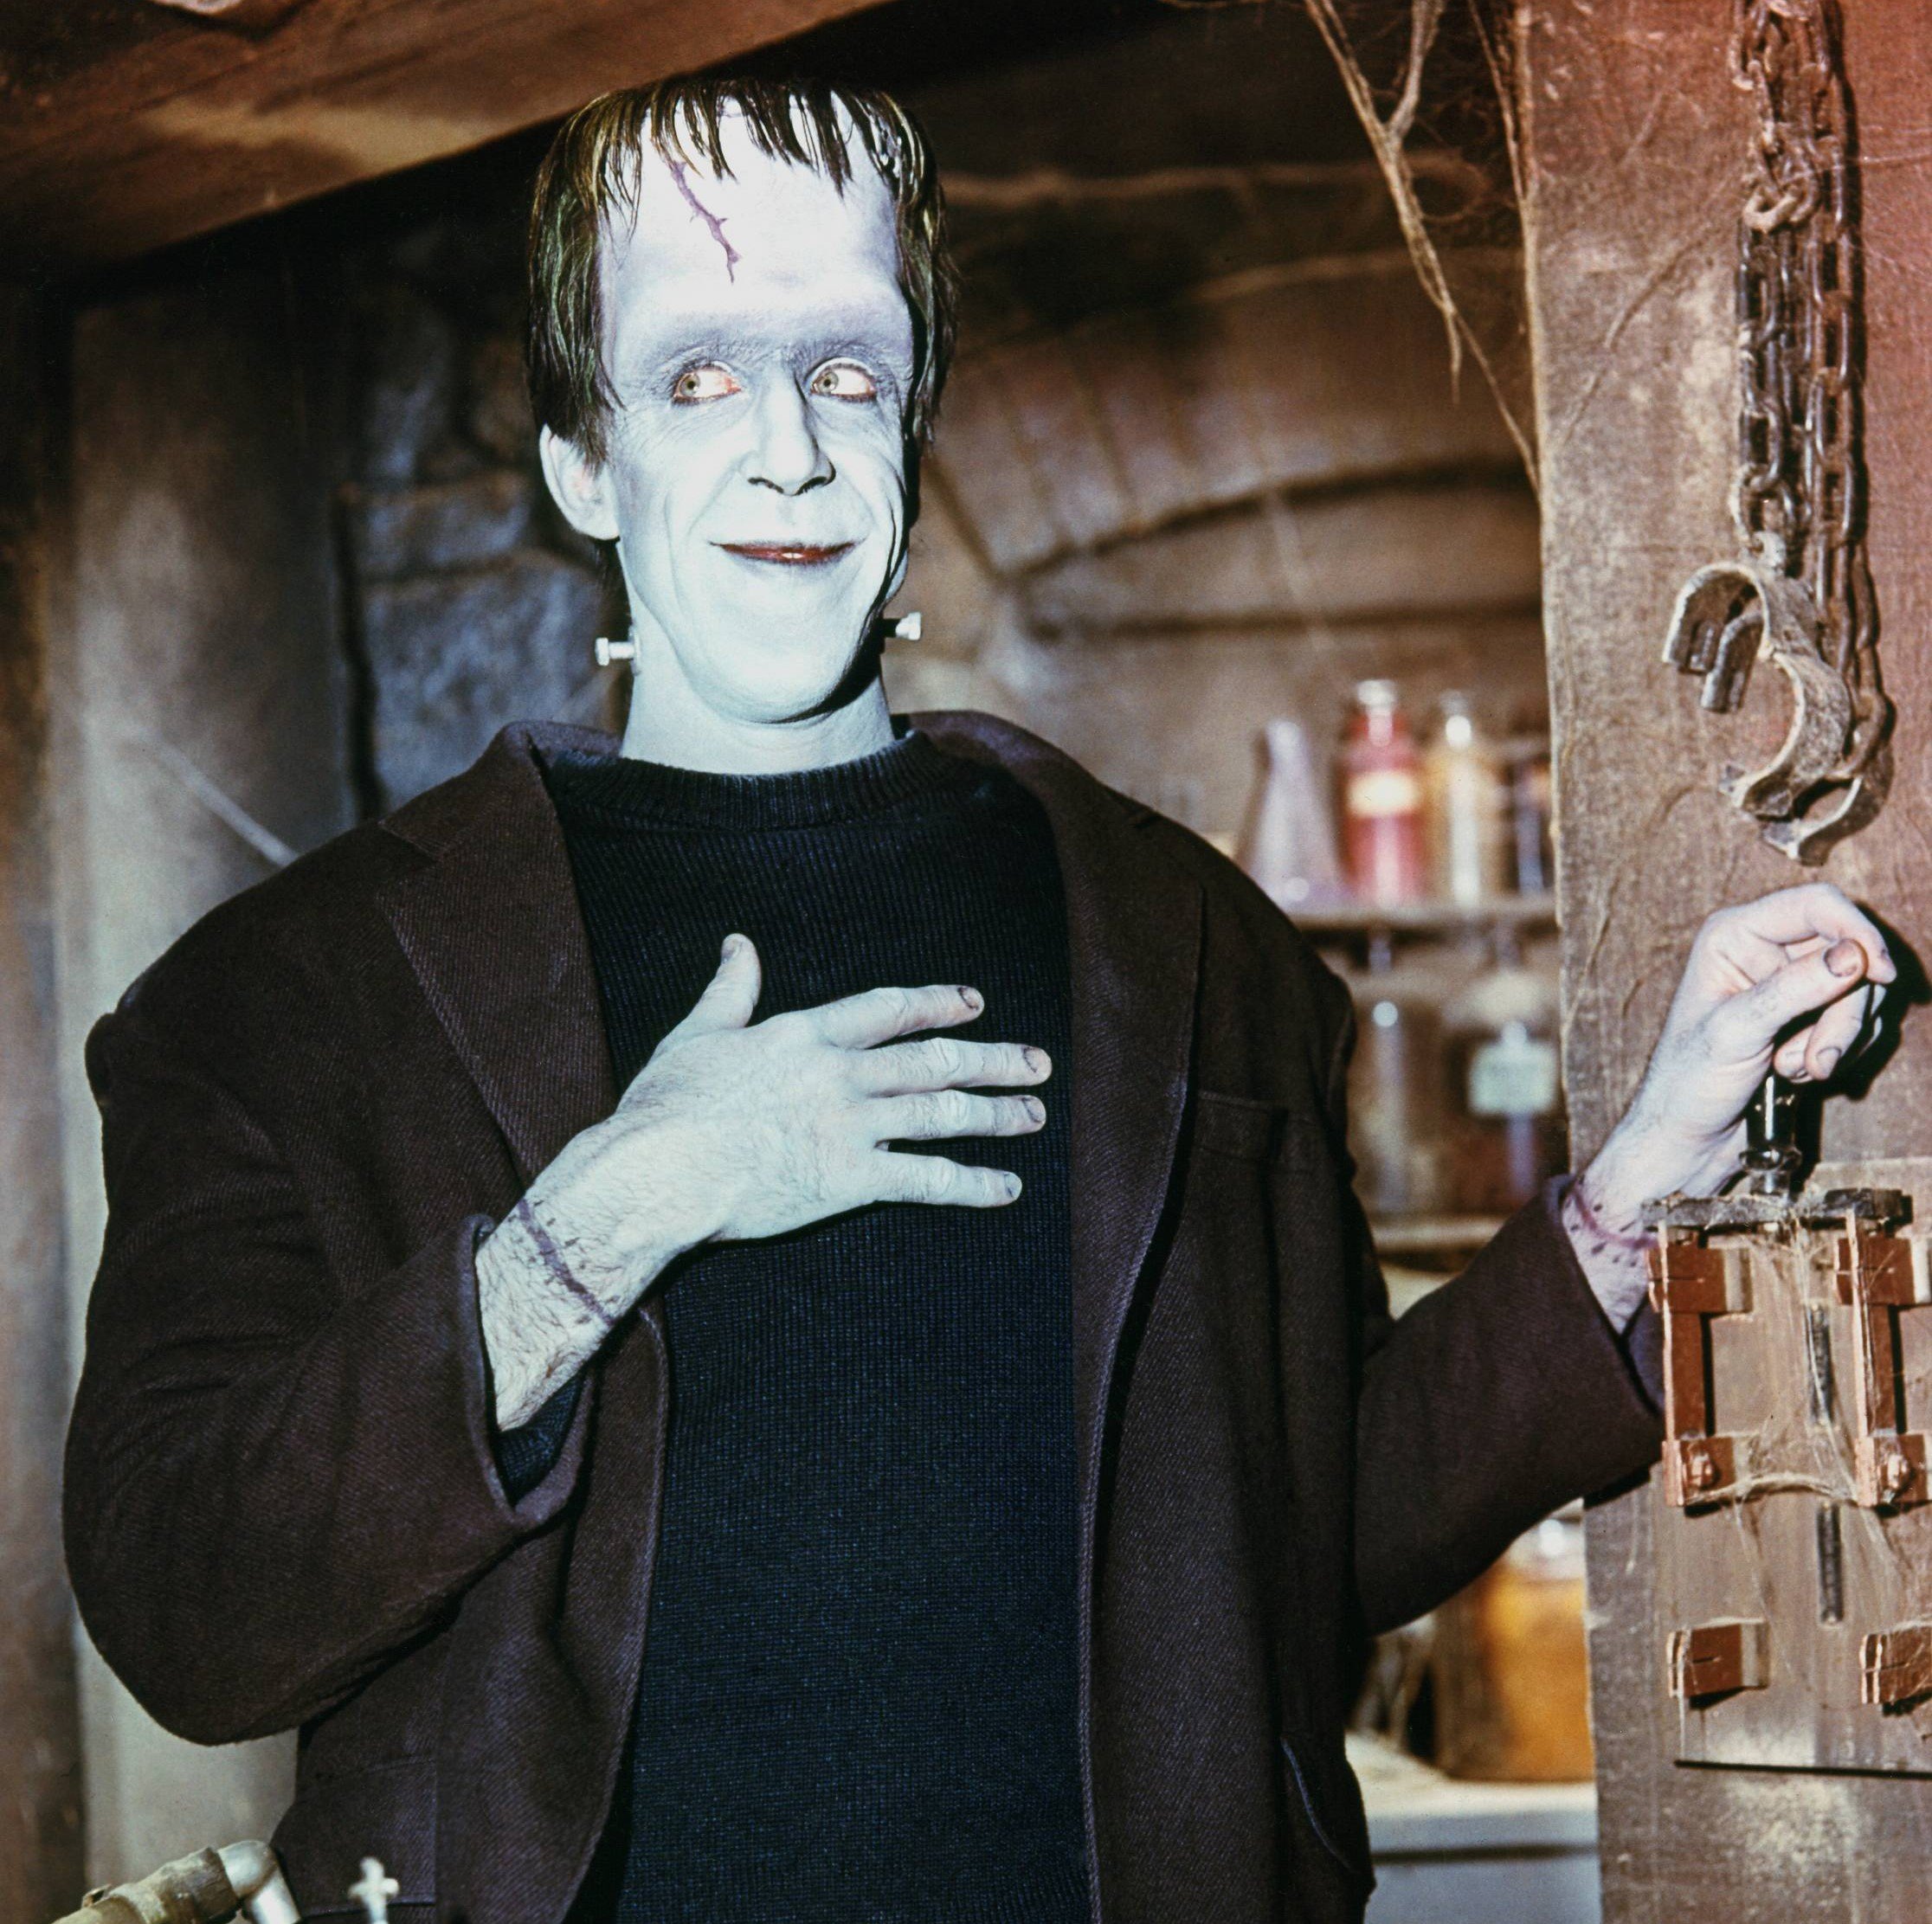 Herman Munster from 'The Munsters' in color